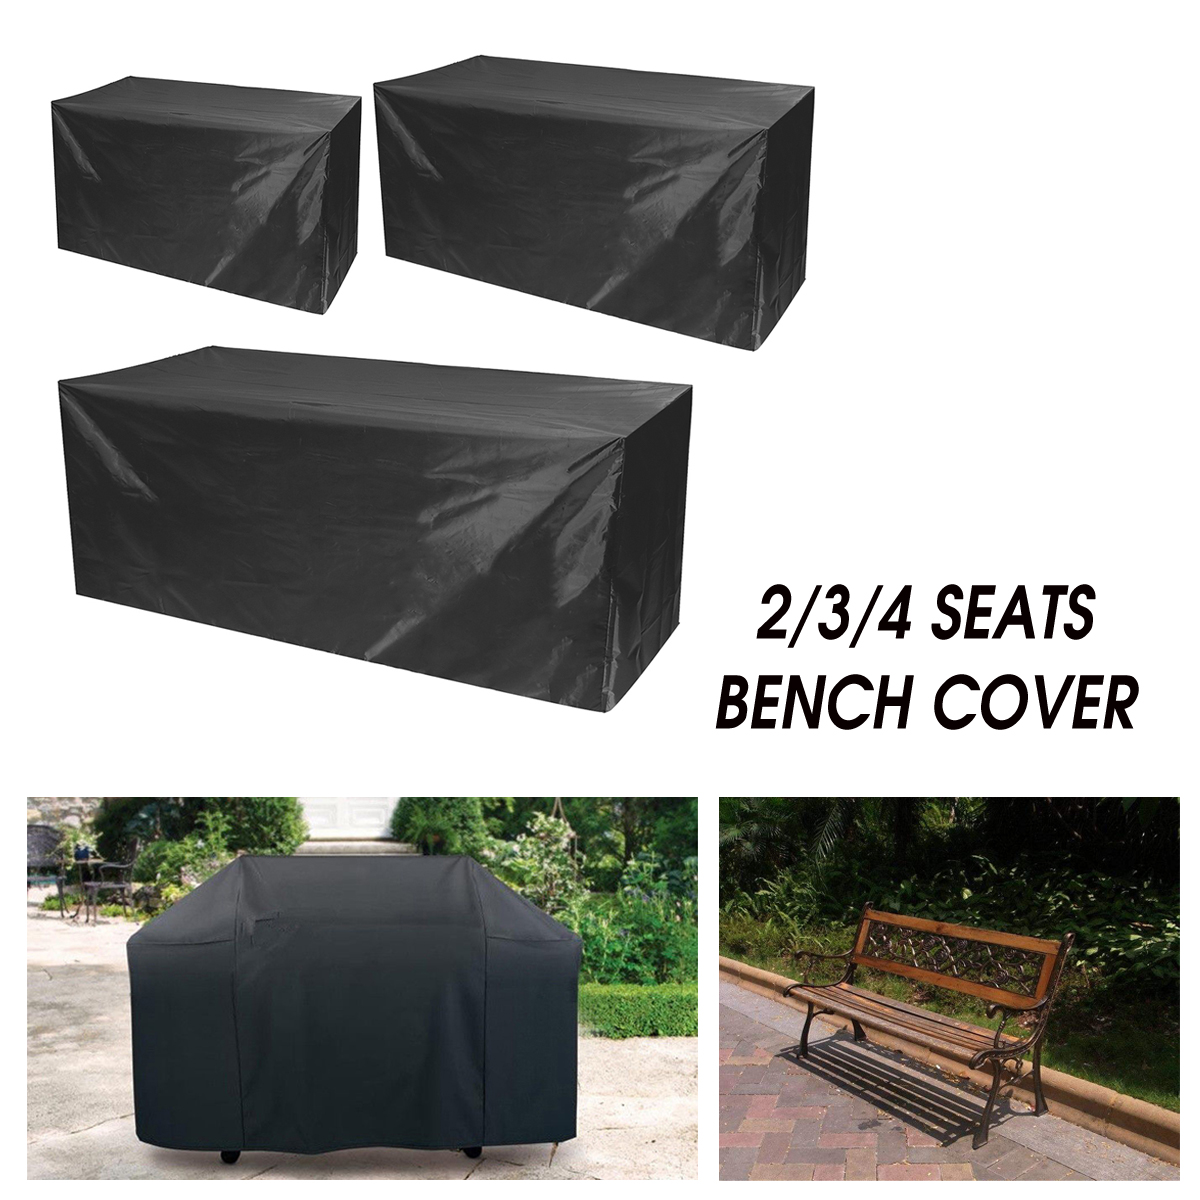 Waterproof-Furniture-Sofa-Bench-Table-Chair-Covers-234-Seaters-Garden-Outdoor-Patio-furniture-Cover-1446119-1